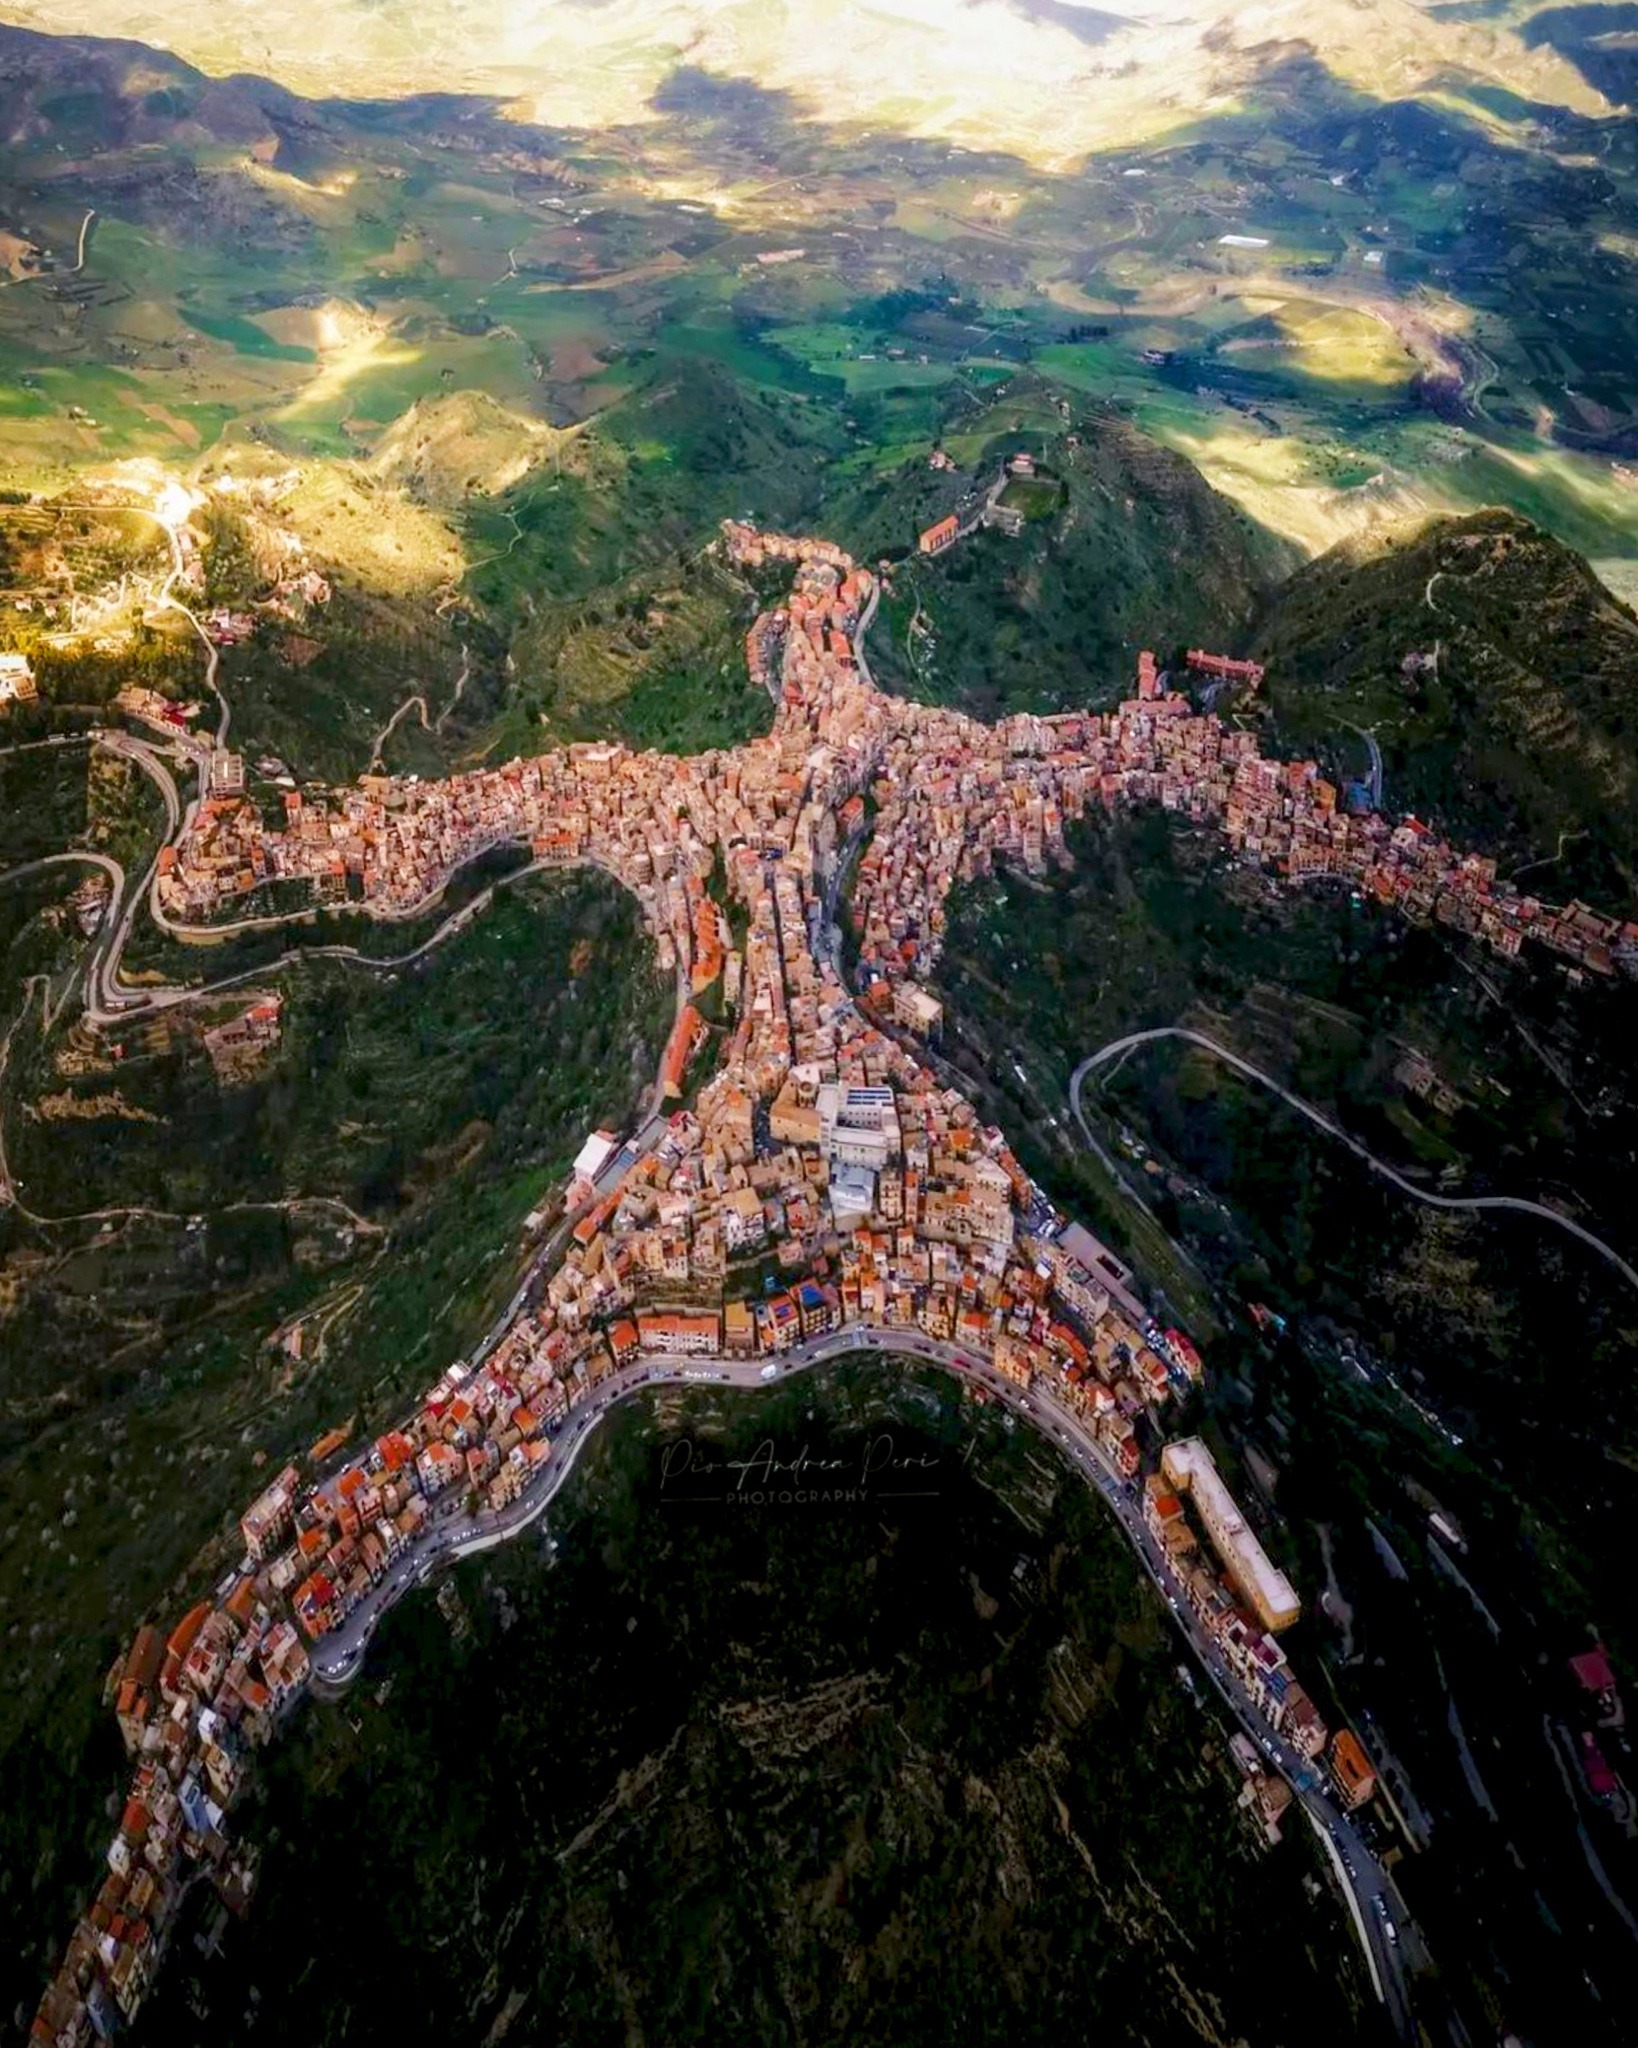 dailyoverview:Centuripe is a town of about 5,400 people on the island of Sicily, in southern Italy. It is located in hill country, between the Dittaino and Salso rivers, at roughly 2,400 feet (730 m) above sea level. When viewed from this aerial angle,